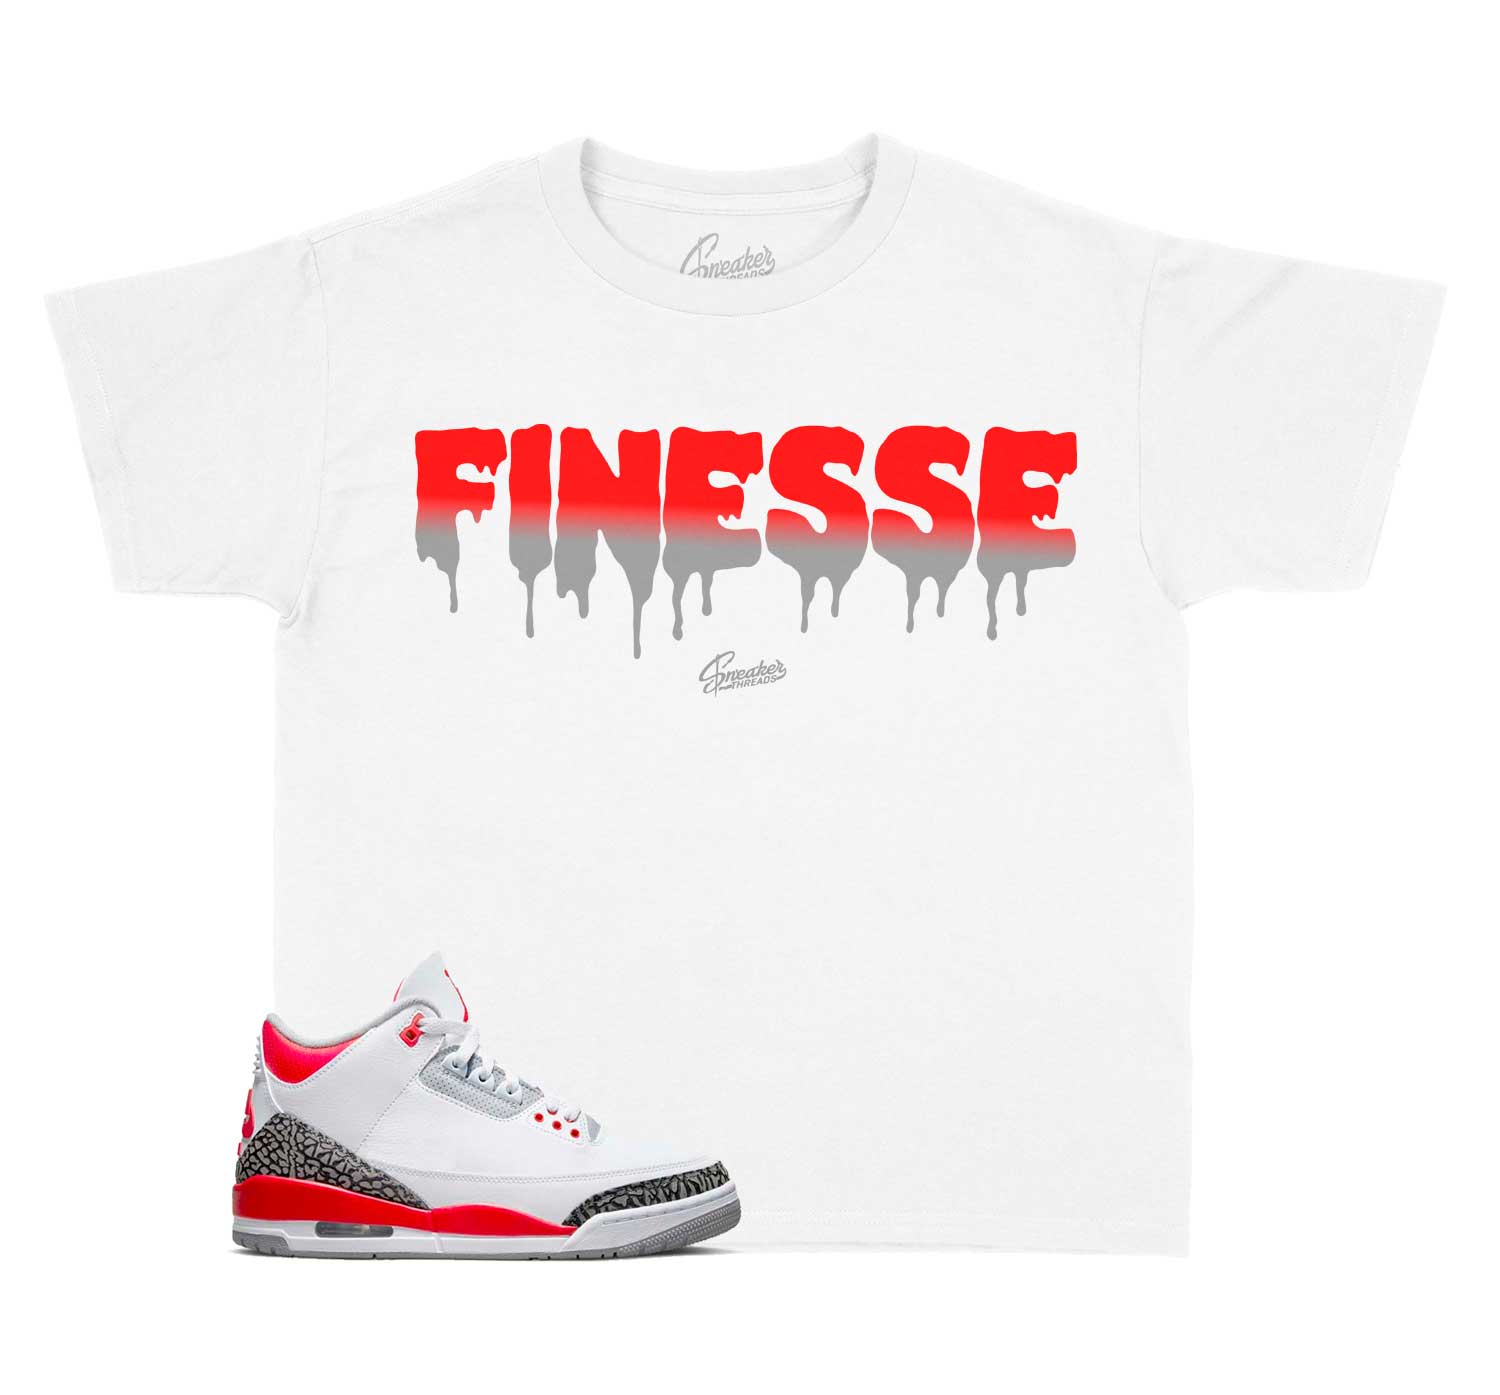 Kids Fire Red 3 Shirt - Finesse - White